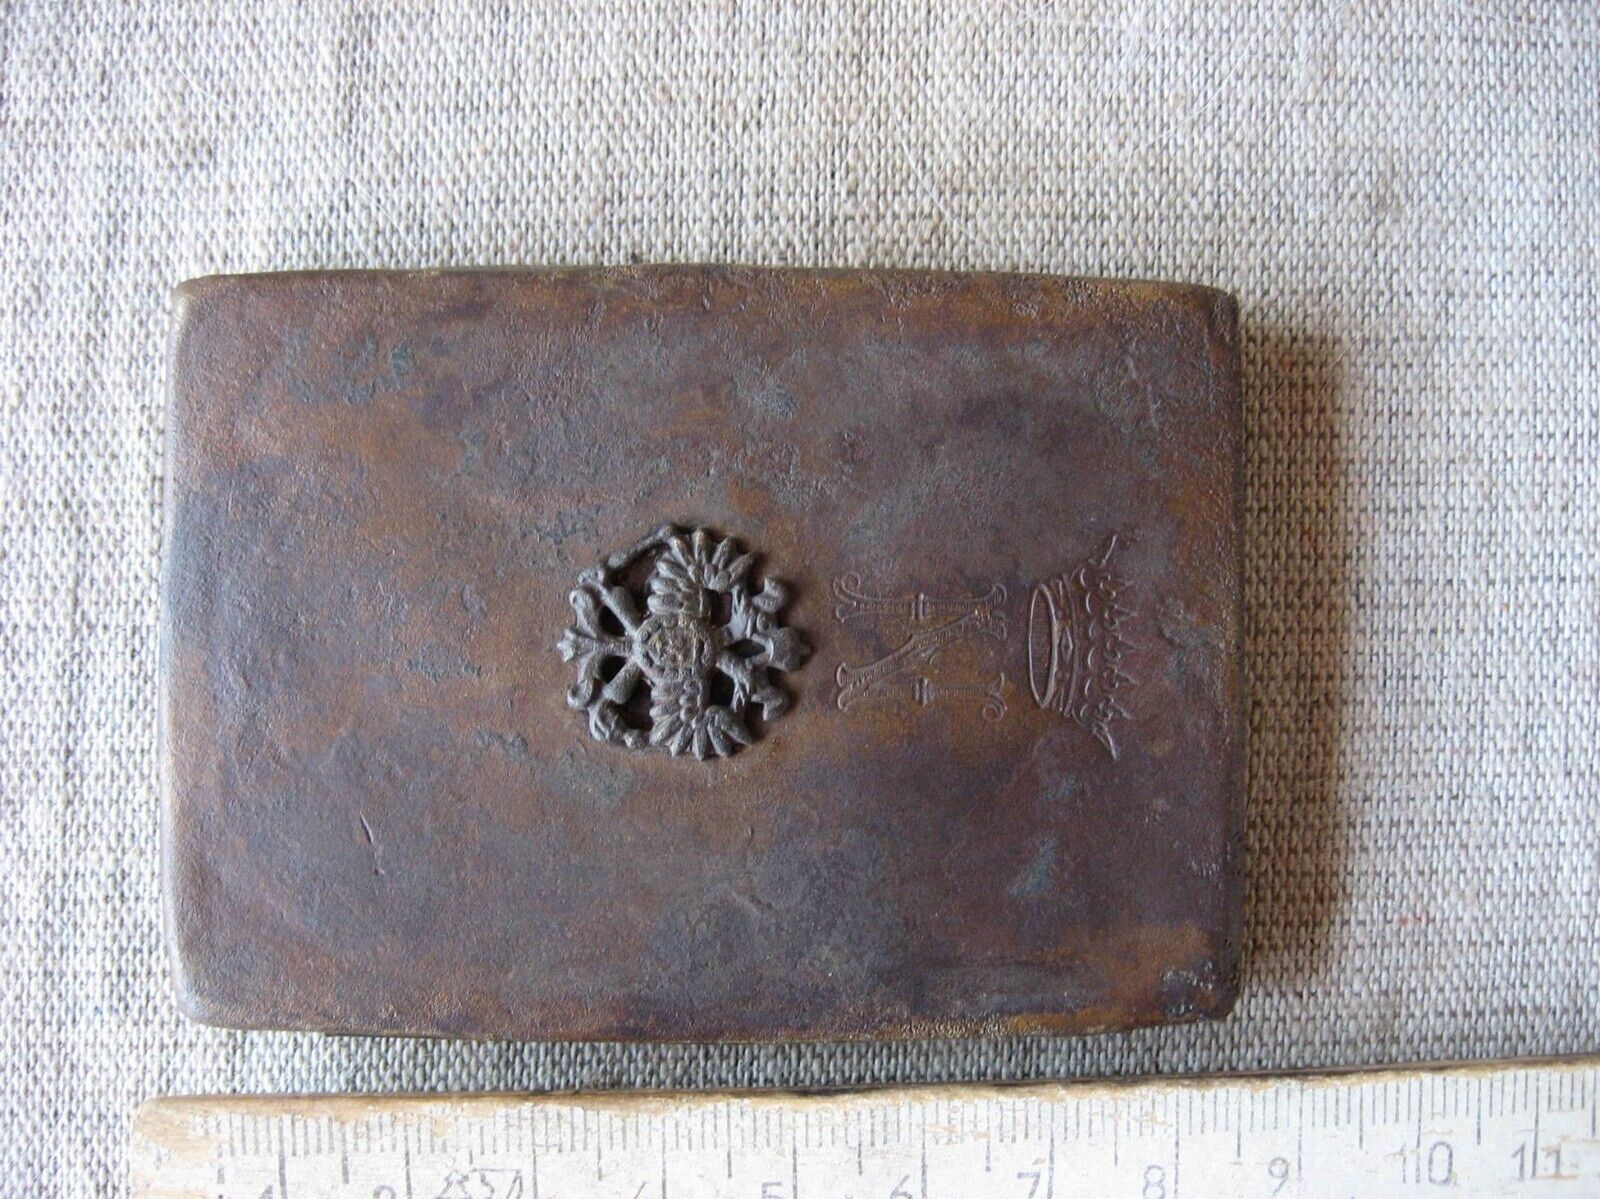 Antique,copper,soldier's snuffbox,with coat of arms Emperor Nicholas II,Russia,R